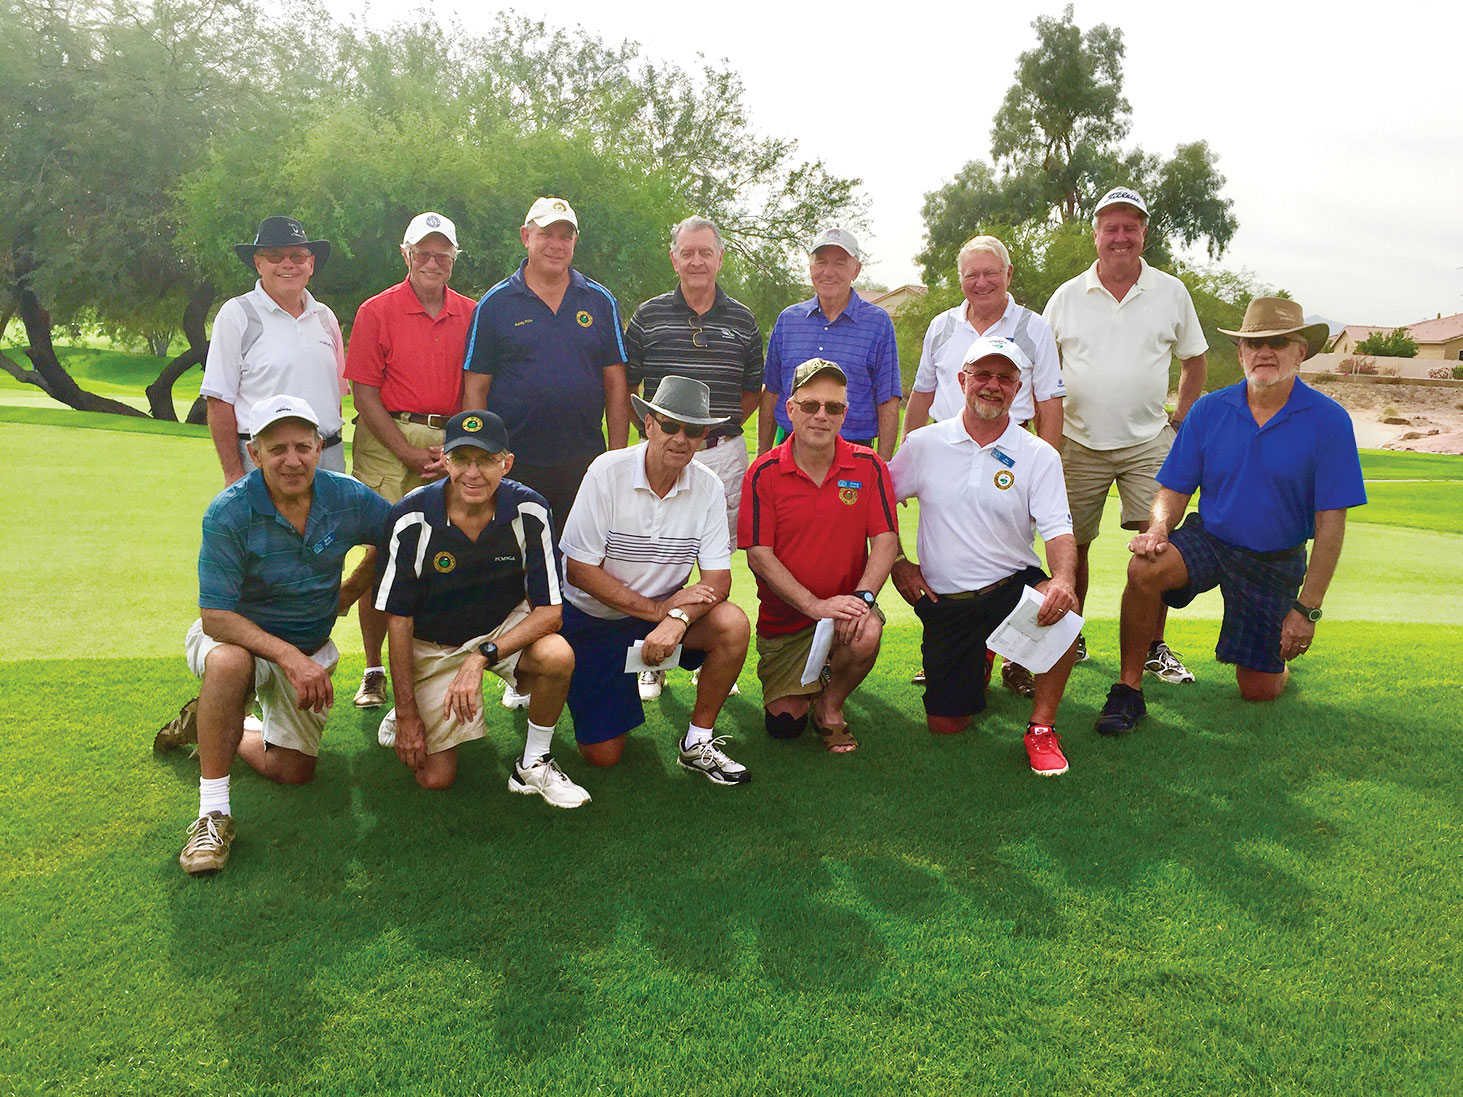 All Winners – PCM9GA Coyote Lakes Tournament, row one, left to right: Bob Spano, Ed Force, Don Burrows, Greg Edwards, Jay Ward, Connie Neeley; row two: Ted McGovern, Clay Troxell, Randy Prinz, Randy James, Pete Pederson, Gary Lord, Paul Parker